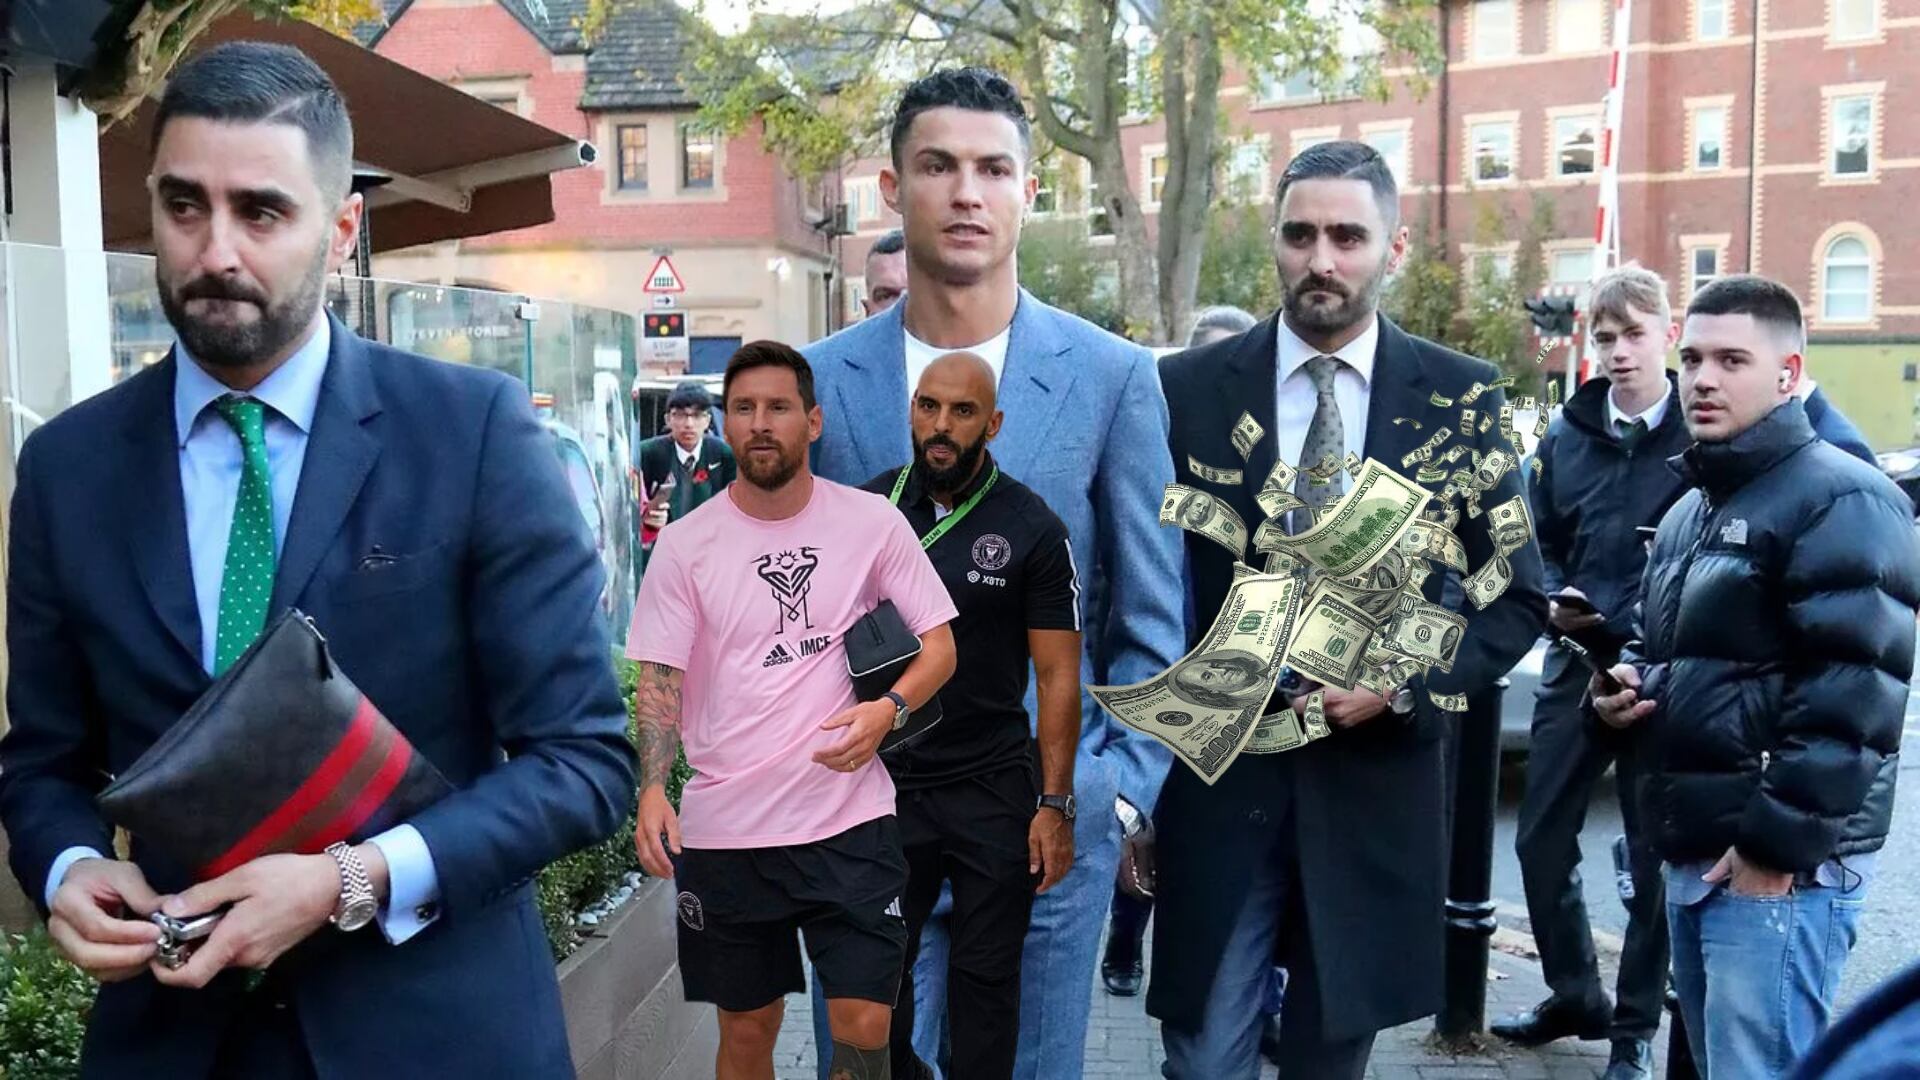 While CR7's bodyguards earn $250k, Messi's bodyguard fortune for taking care of Lionel